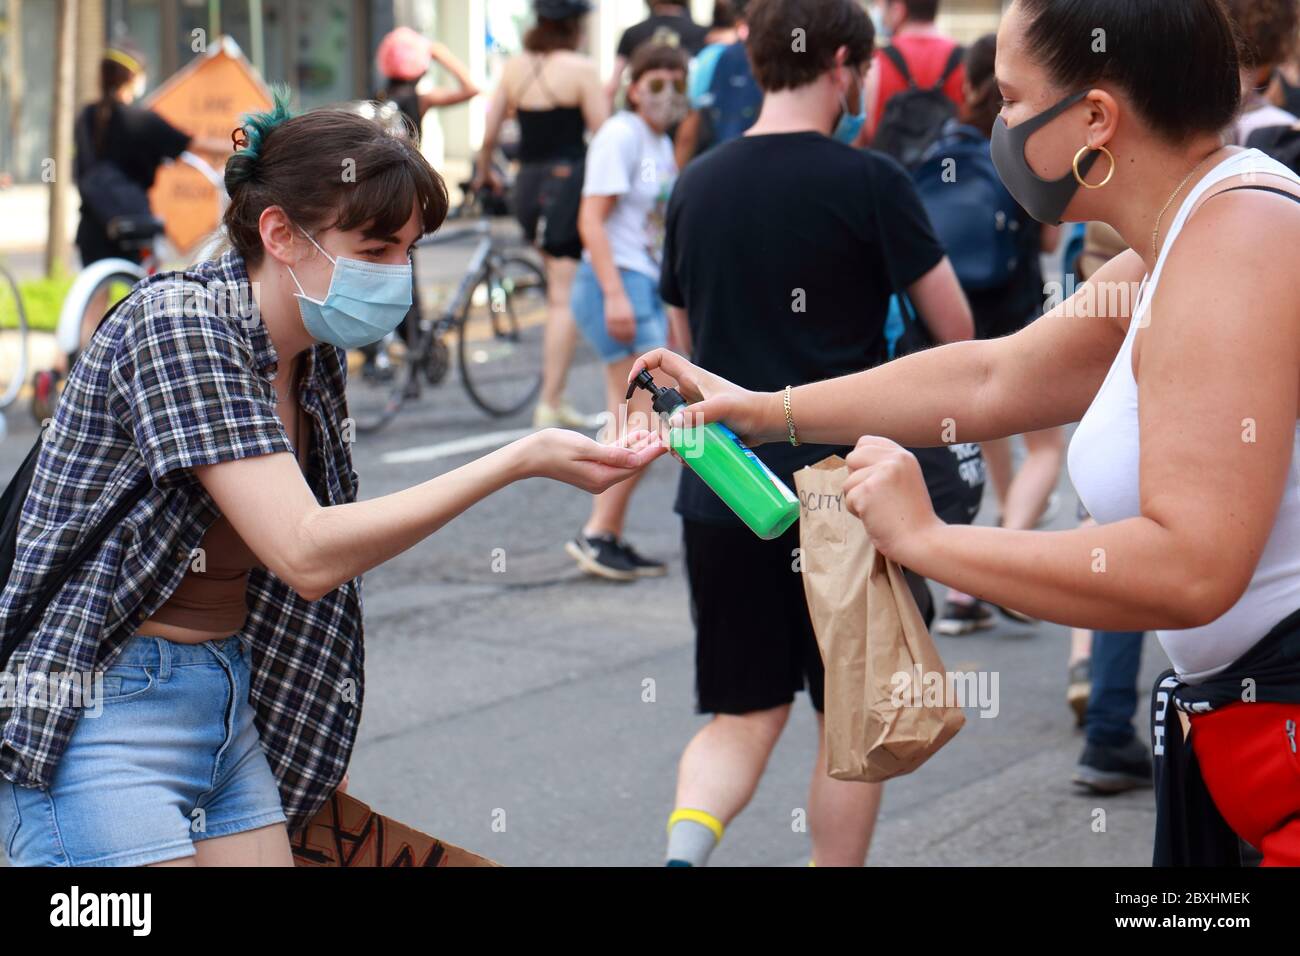 New York, NY. 6th June 2020. A person with a mask dispenses hand sanitizer and snacks at a Black Lives Matter solidarity march through Manhattan calling for justice in a recent string of American police killings: George Floyd, Breonna Taylor, and to countless others. Some people and groups have quickly setup water, snack, and hand sanitizing stations anticipating the arrival of marchers through their area. June 6, 2020 Stock Photo